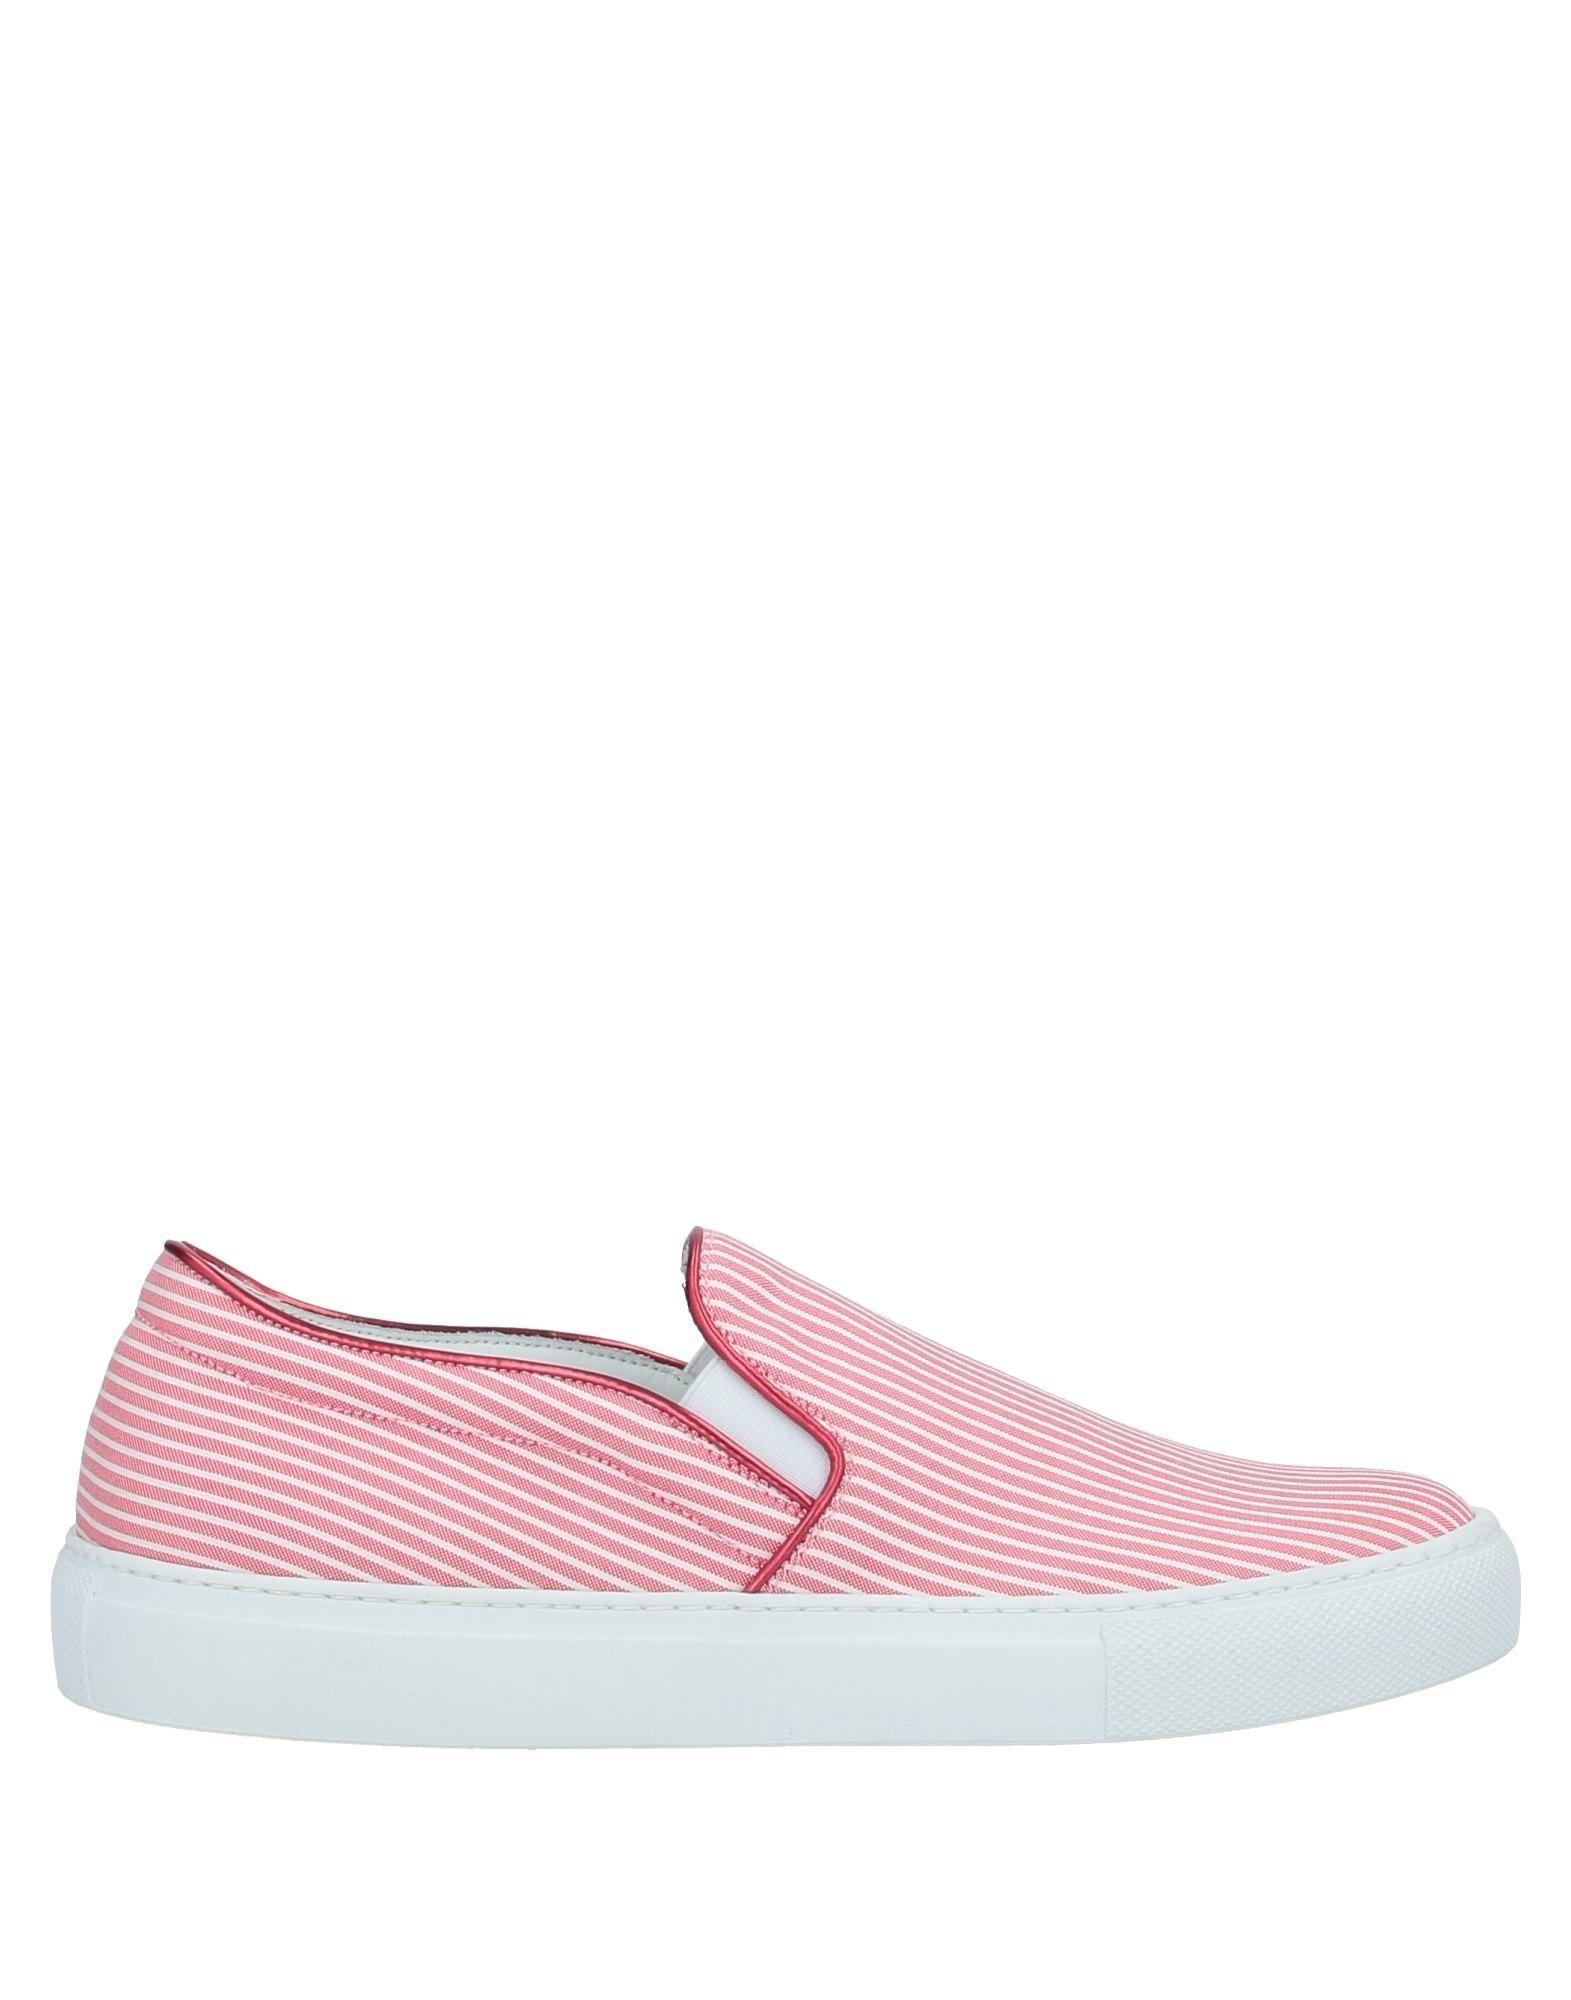 L'Autre Chose Leather Low-tops & Sneakers in Red - Lyst